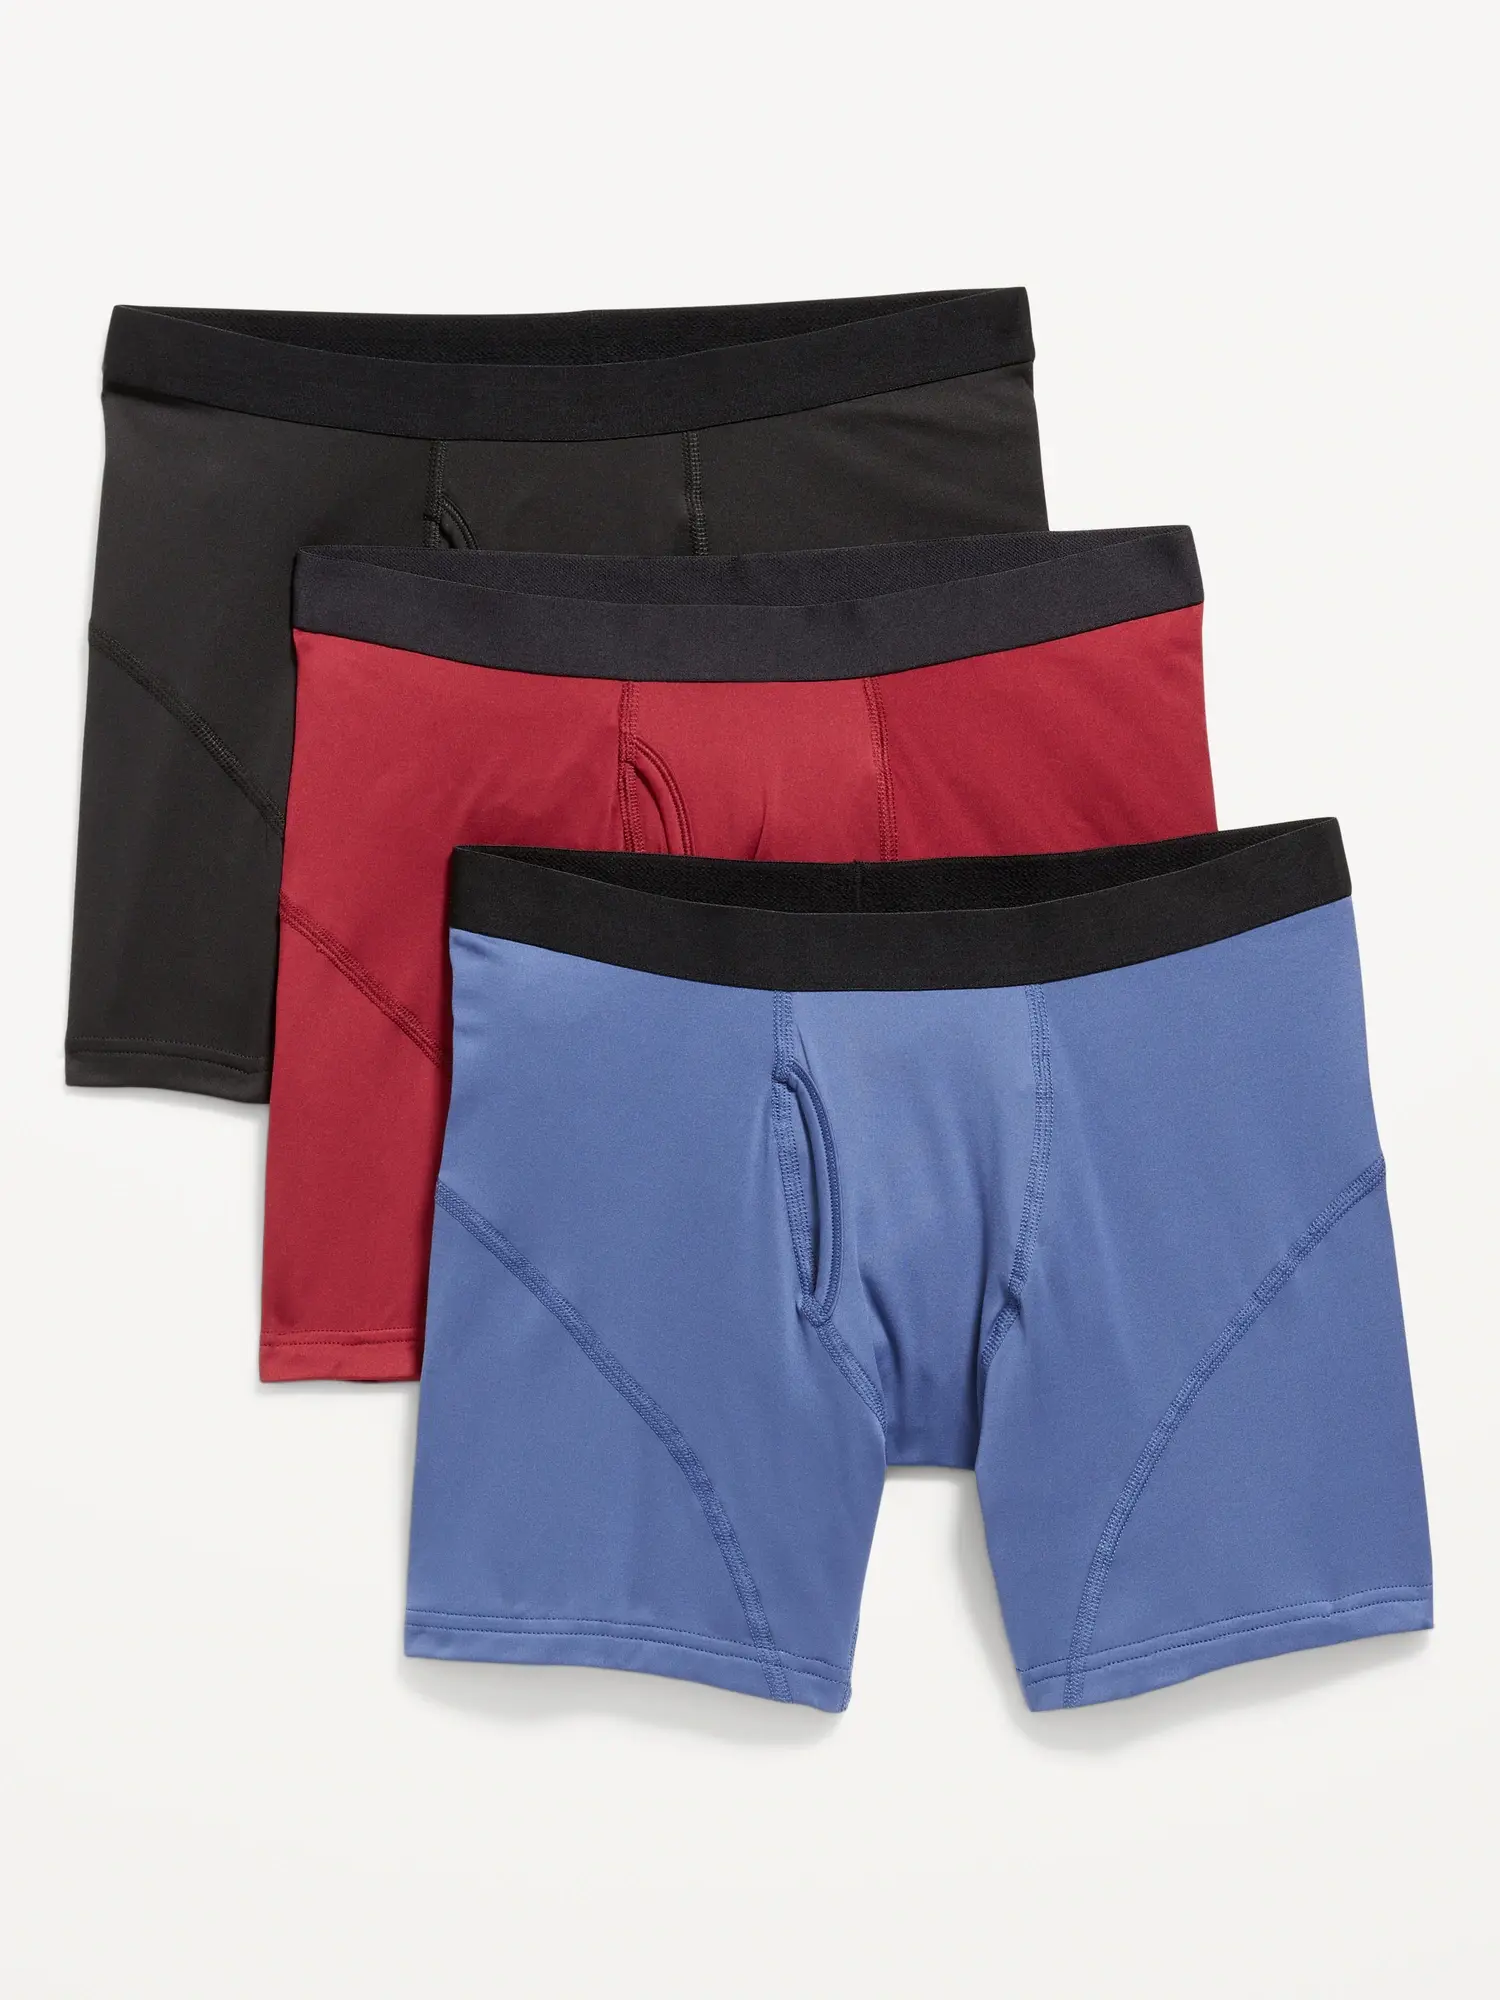 Old Navy Go-Dry Cool Performance Boxer-Briefs Underwear 3-Pack for Men -- 5-inch inseam multi. 1